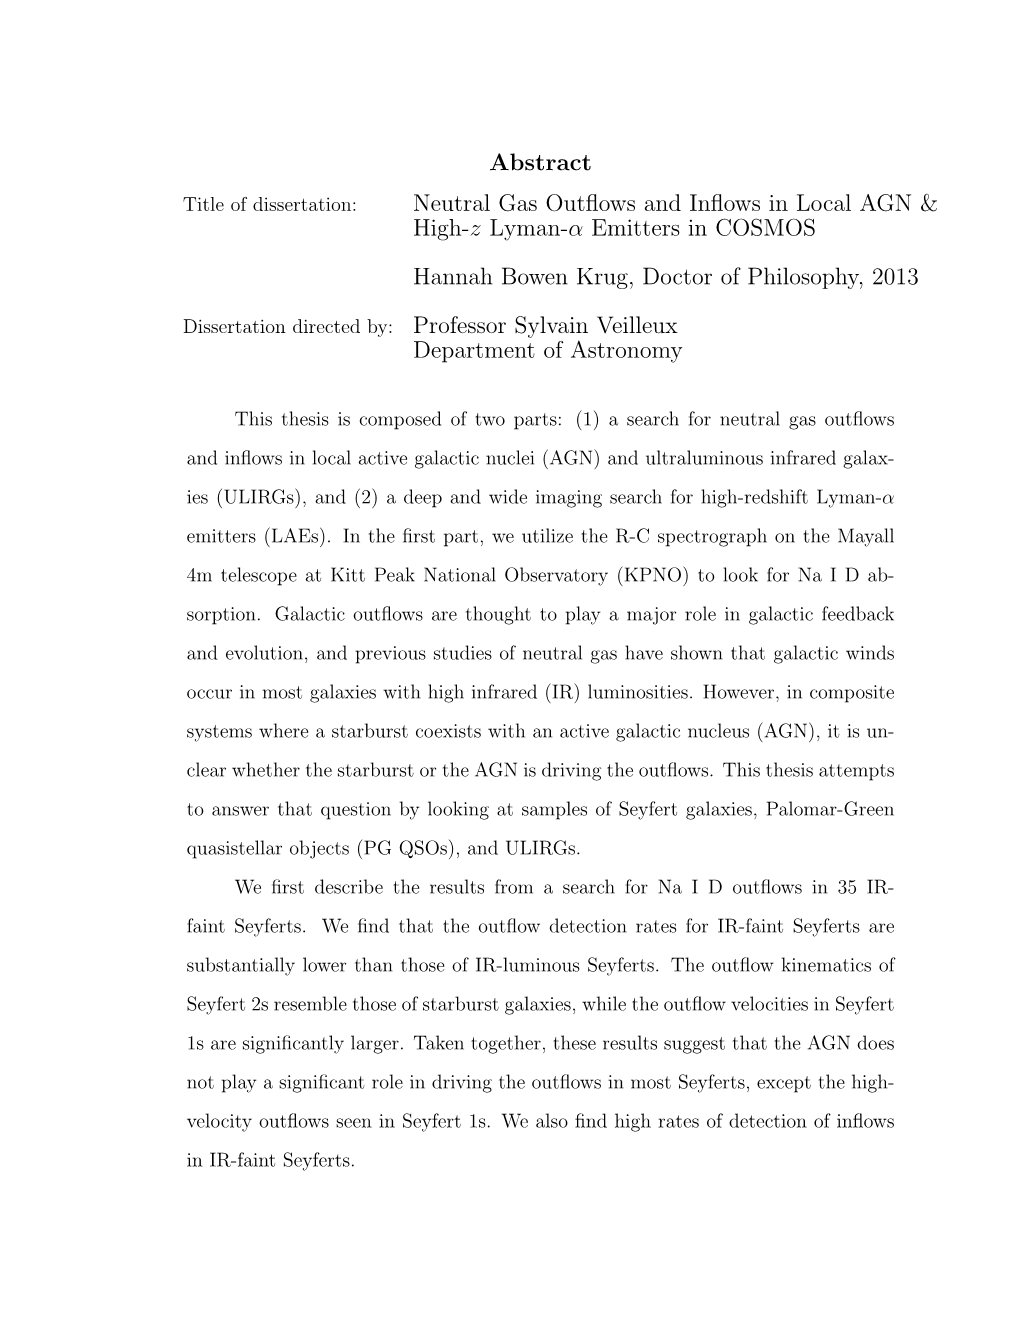 Abstract Neutral Gas Outflows and Inflows in Local AGN & High-Z Lyman-Α Emitters in COSMOS Hannah Bowen Krug, Doctor Of